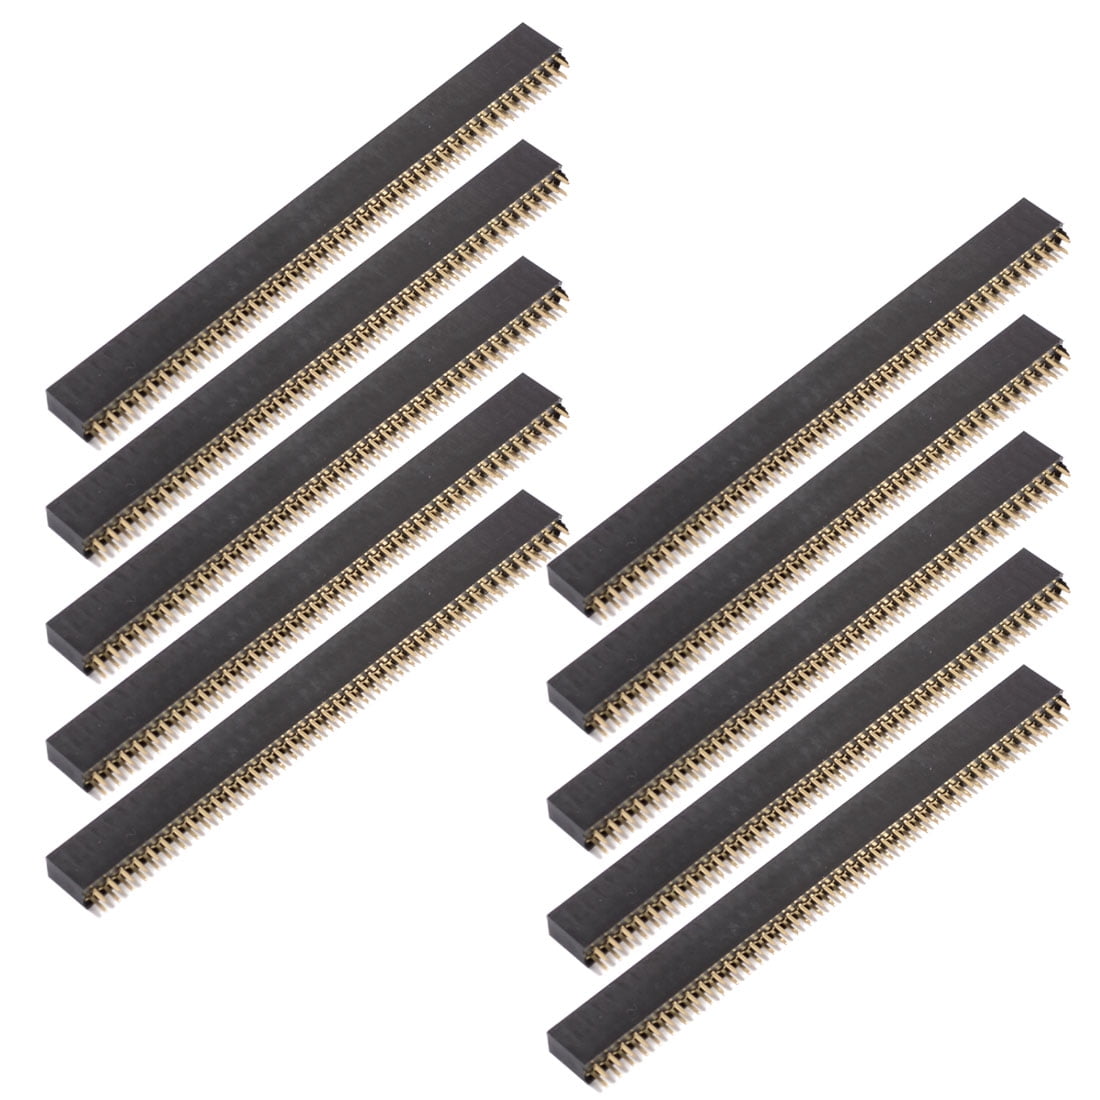 Red 2x40 Pin 2.54mm Straight Male Header Pack of 5 